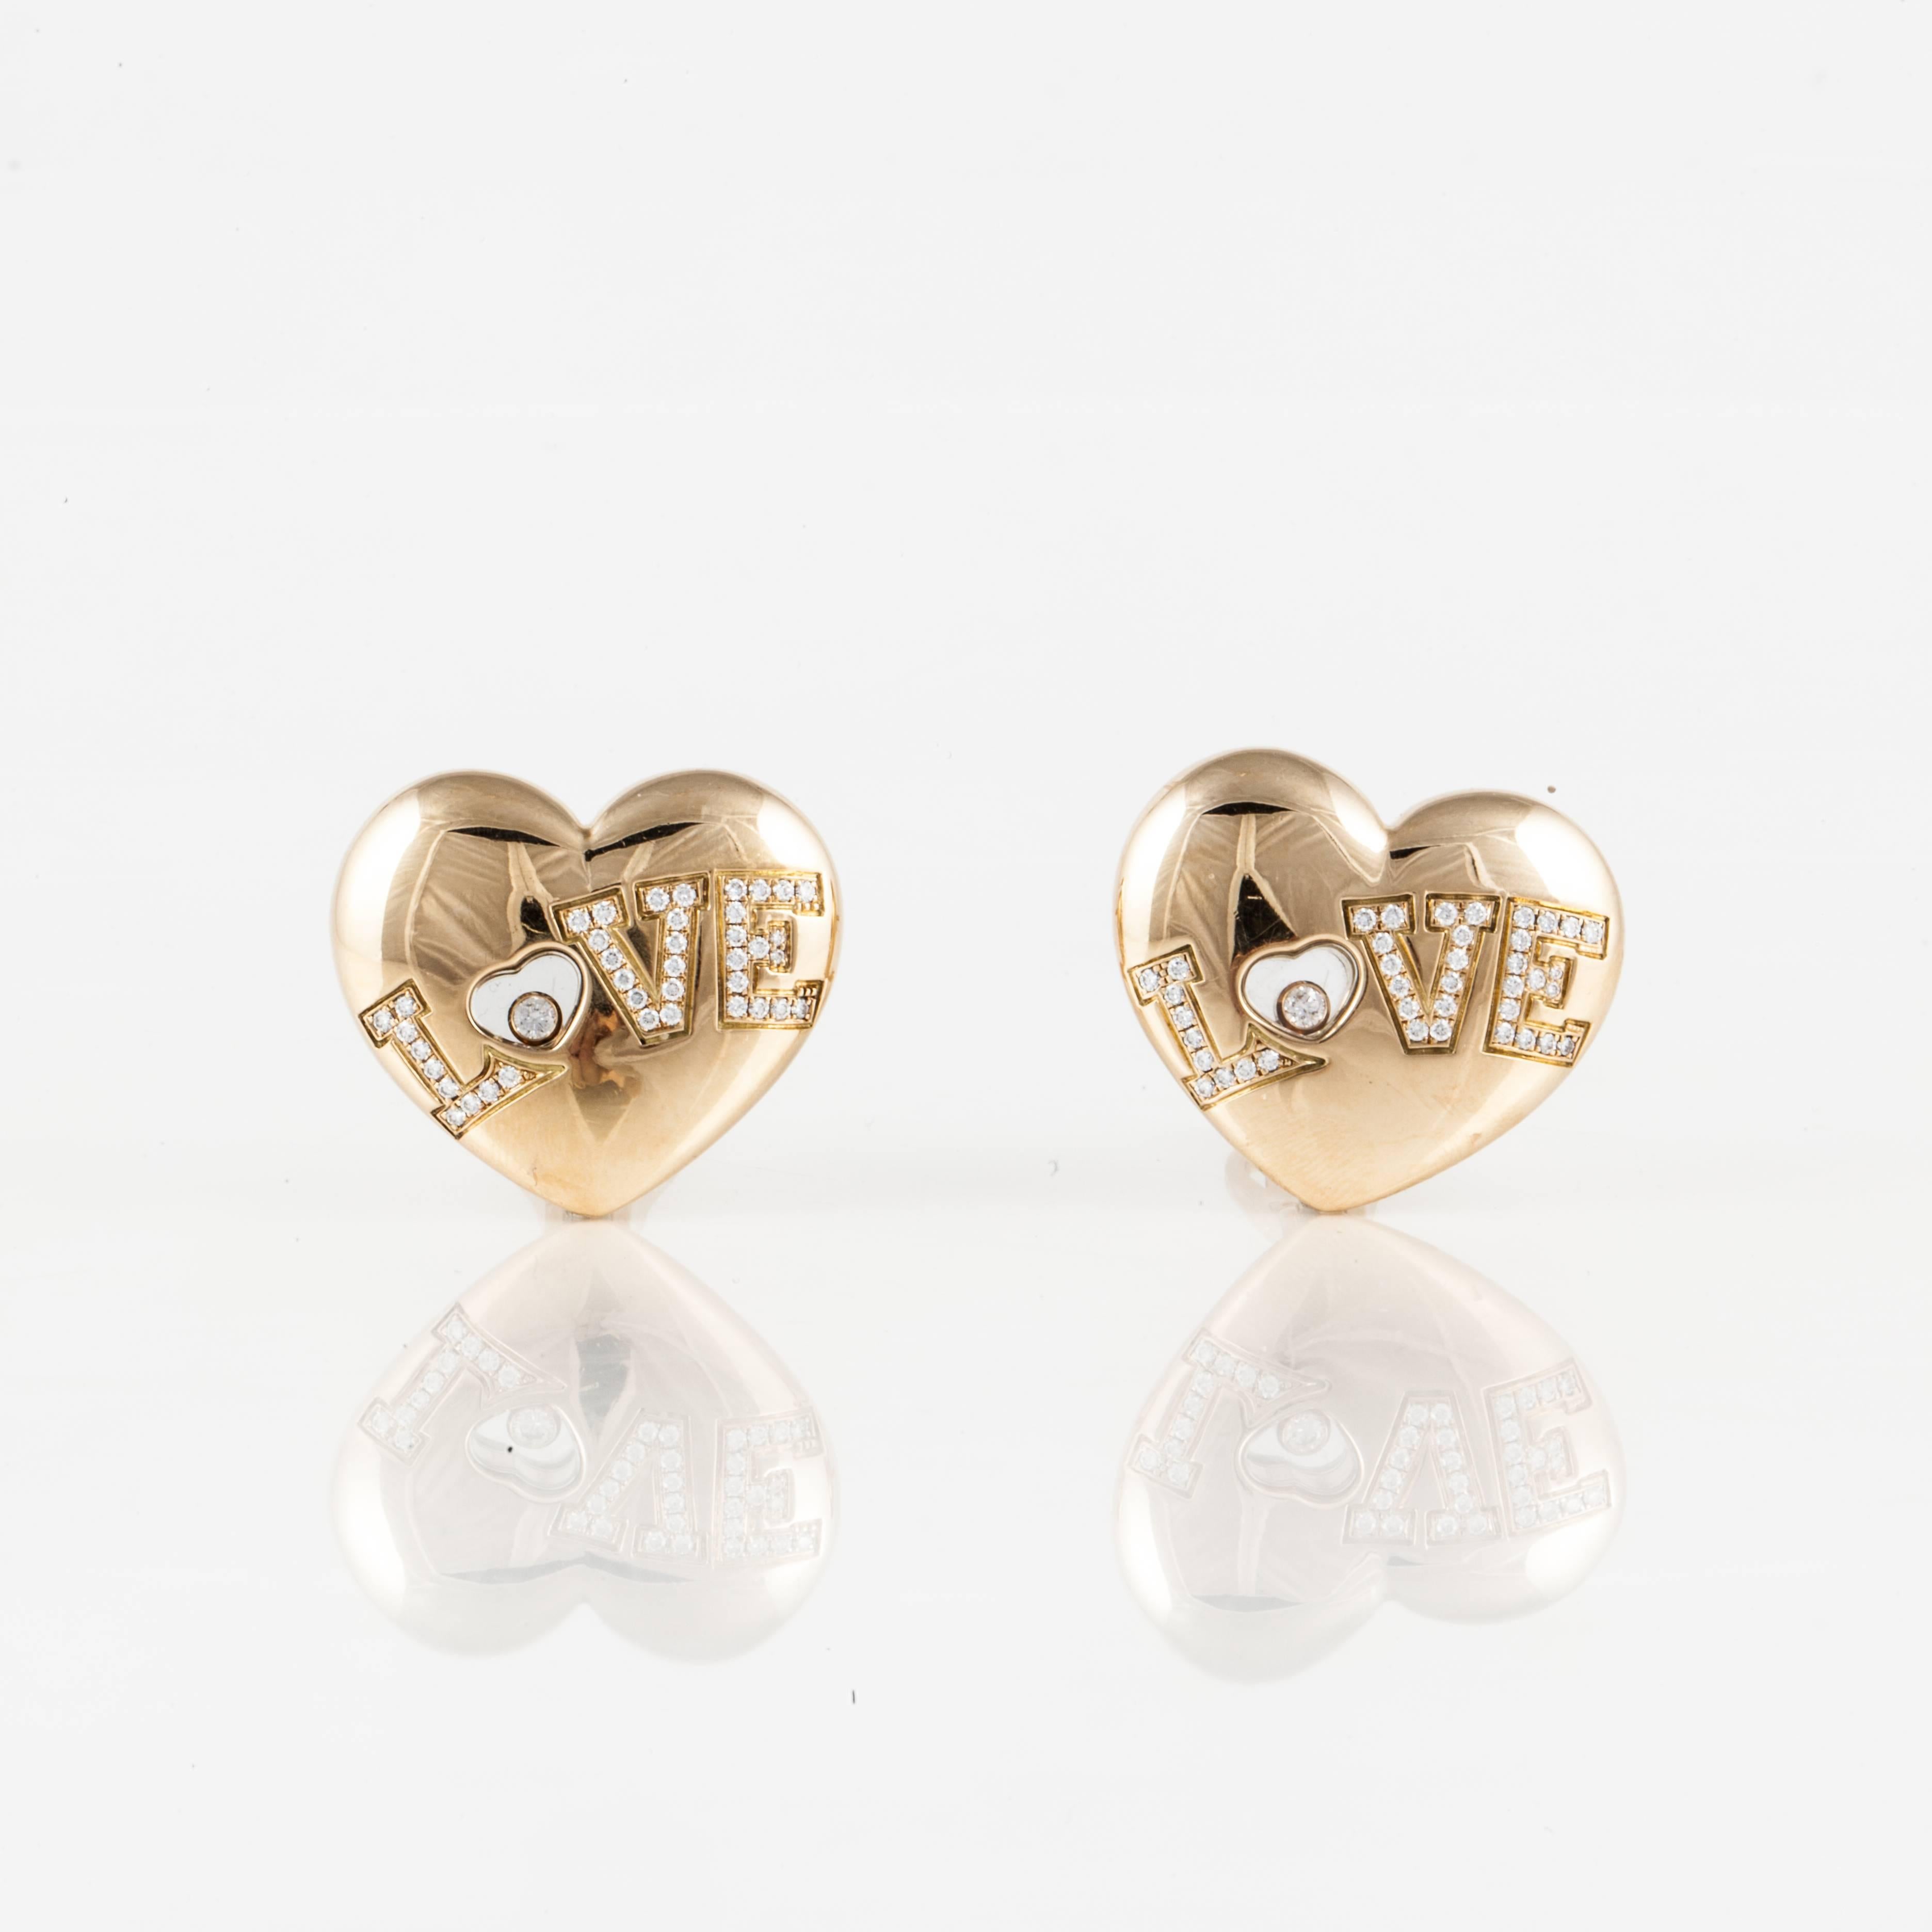 Pair of Happy Diamonds Love earrings by Chopard.  They are numbered:  84/2899-20 9853409.  Heart shaped with LOVE spelled out in round diamonds.  There are 80 round diamonds totaling 0.90 carats; G-H color and VVS-VS clarity.  Earrings measure 7/8